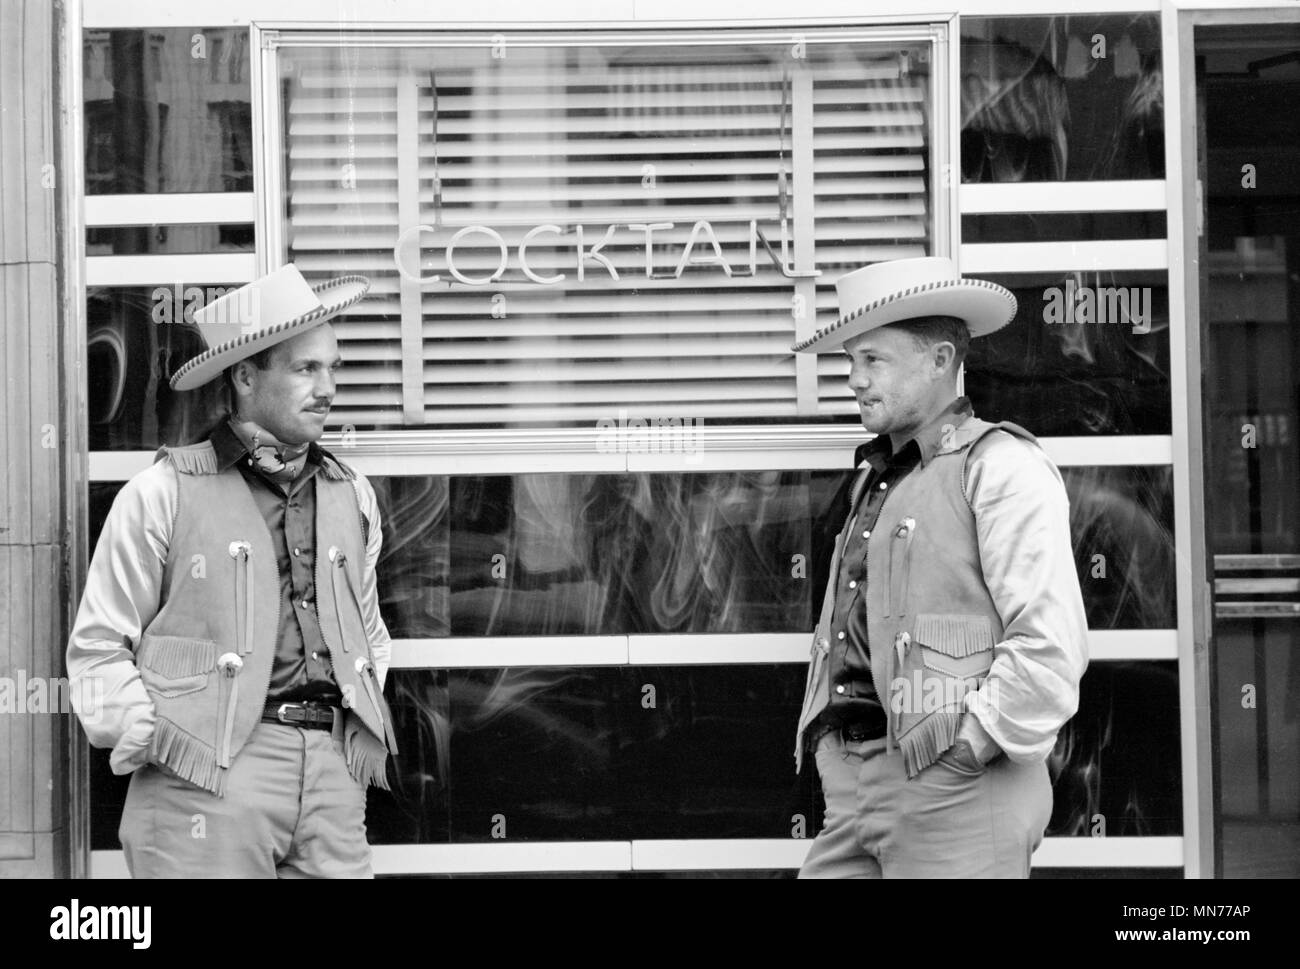 Two Cowboys Dressed Alike in Front of Bar, Billings, Montana, USA, Arthur Rothstein for Farm Security Administration, July 1939 Stock Photo